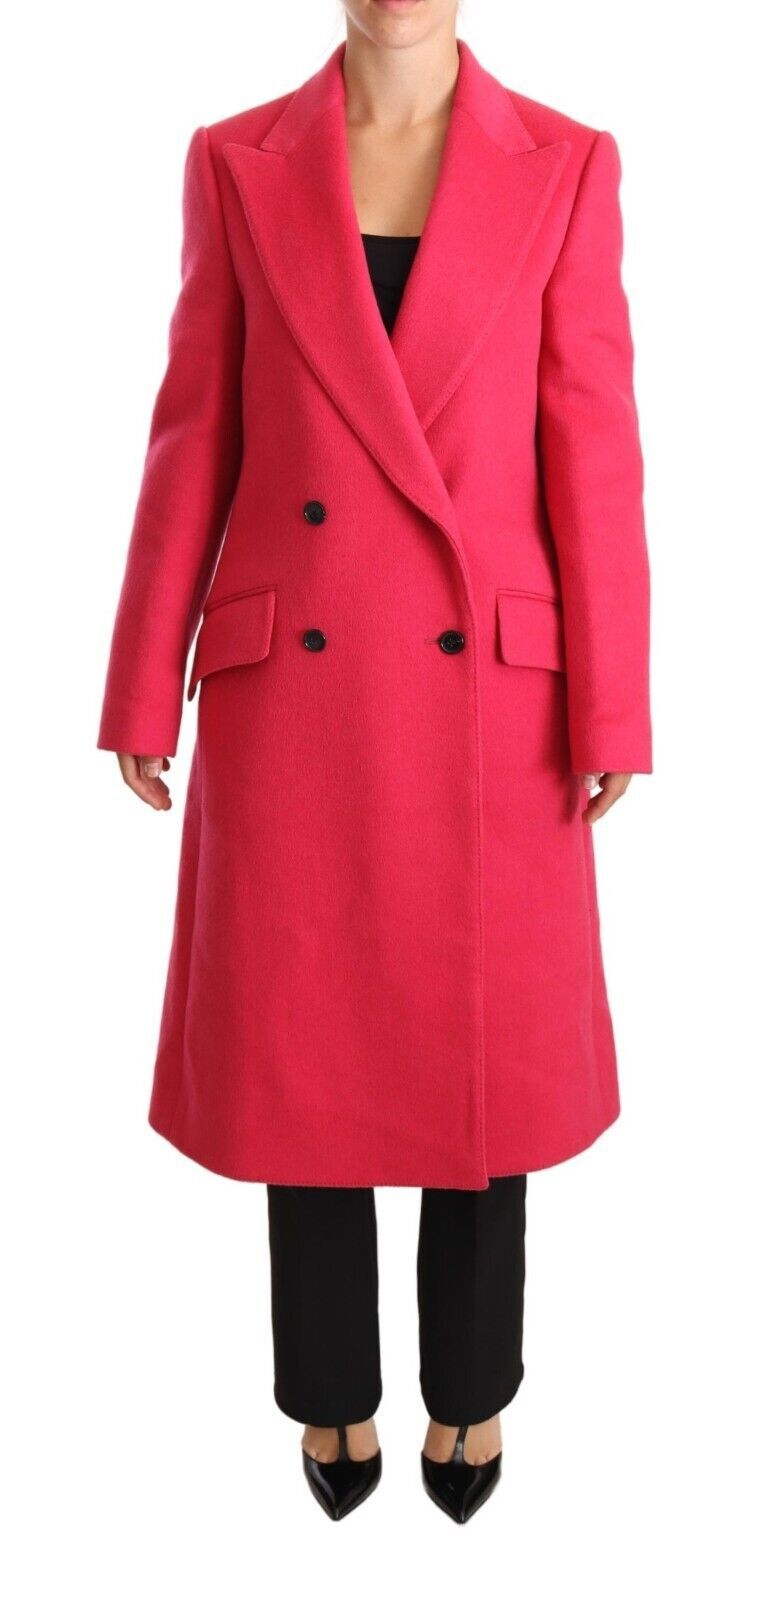 Dolce & Gabbana Pink Double Breasted Trenchcoat Jacket